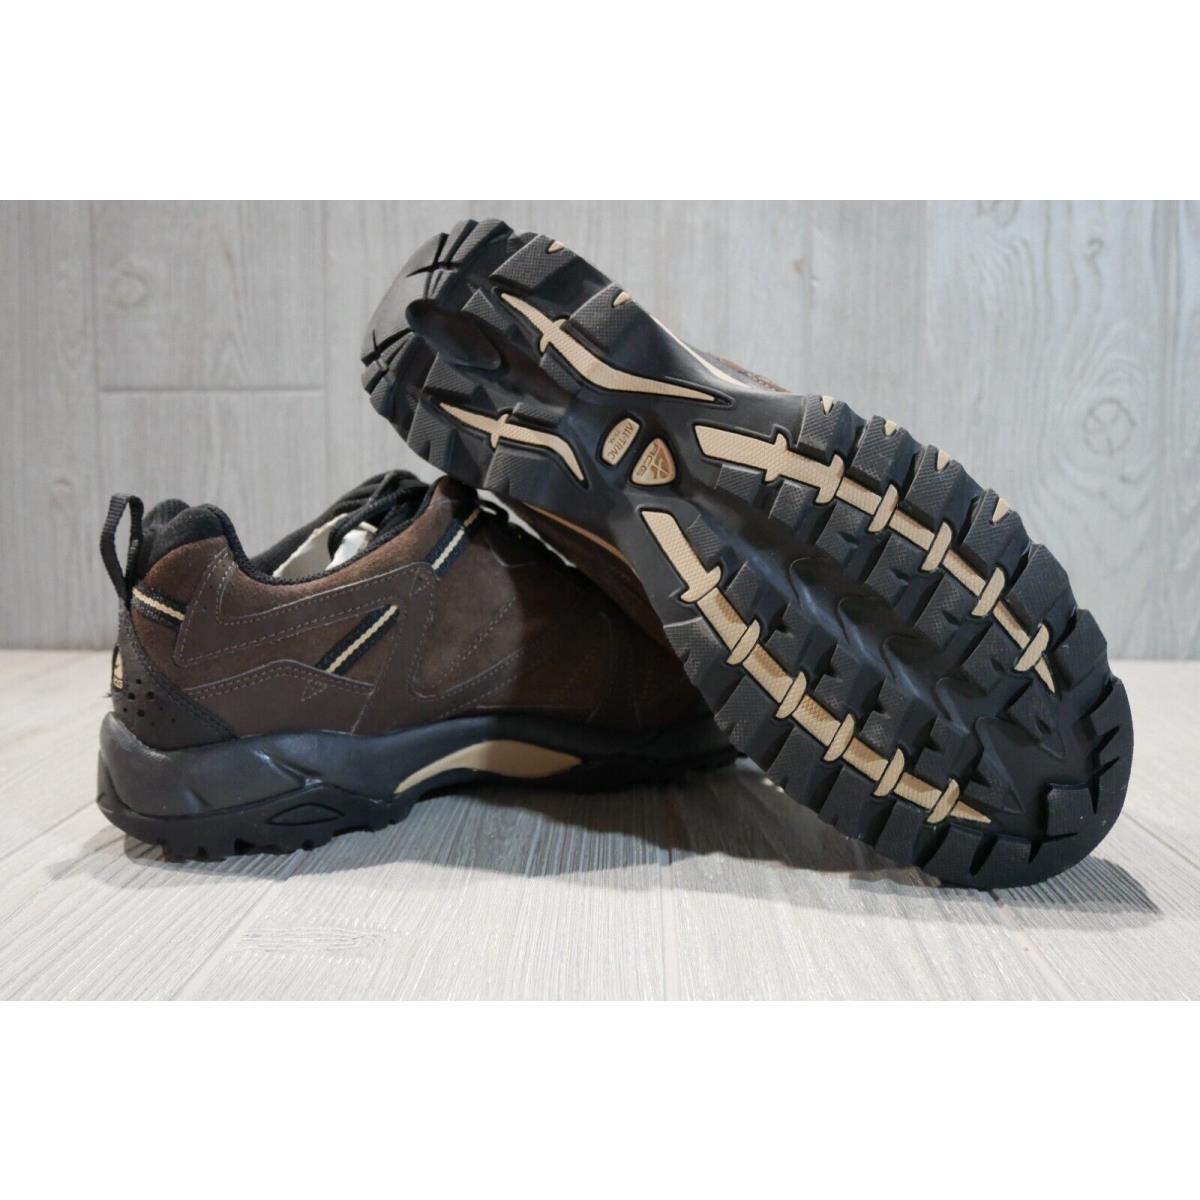 Nike shoes Bandolier - Brown 6